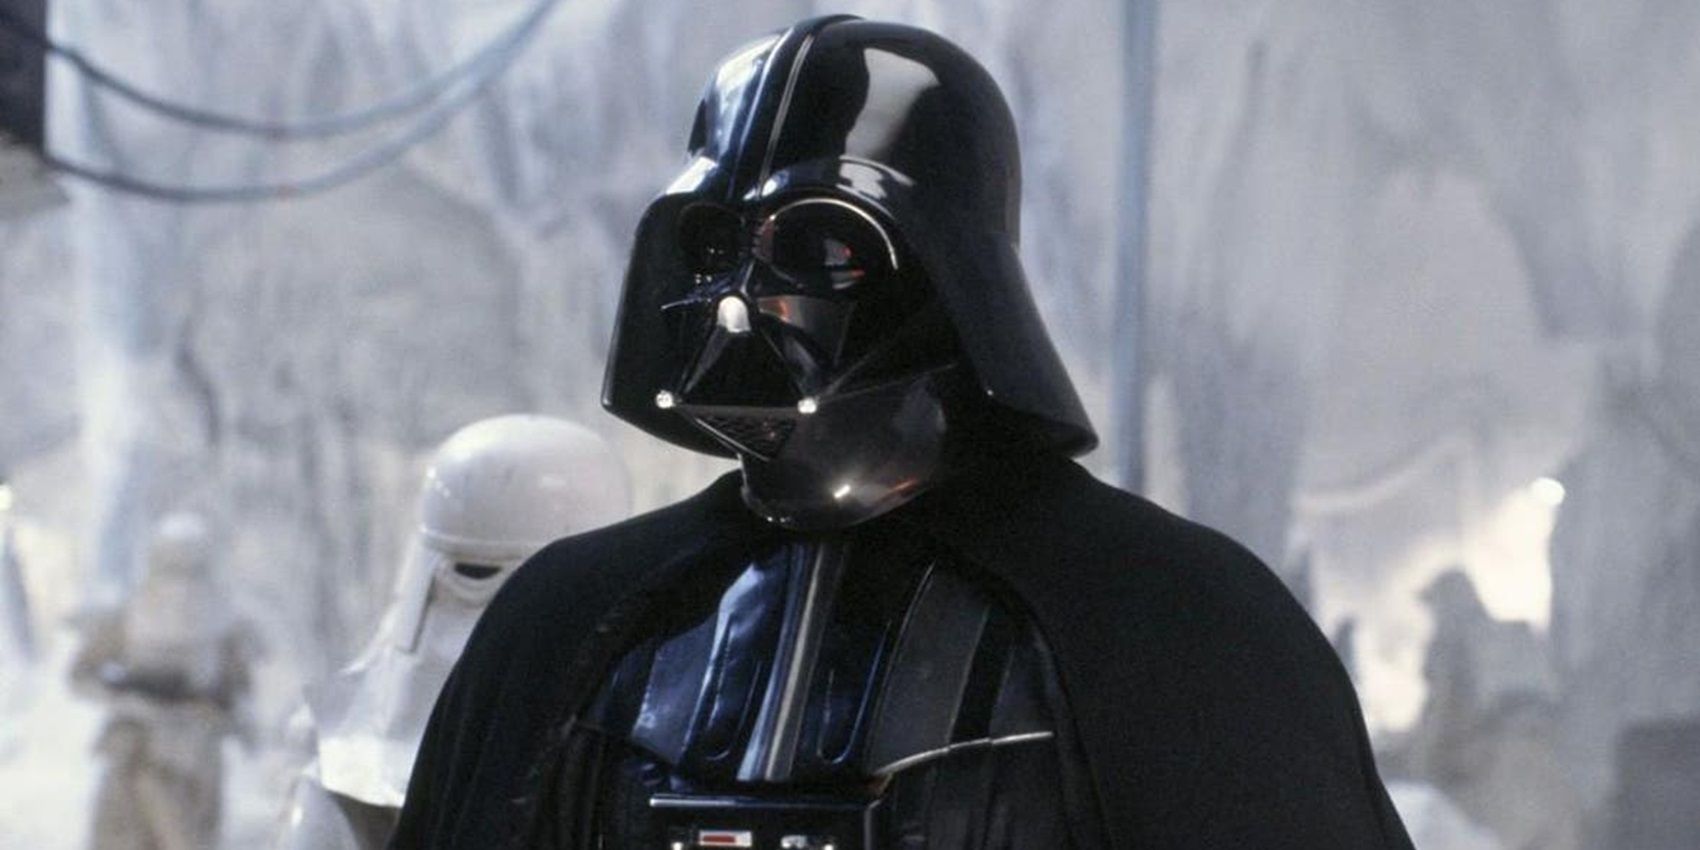 Darth Vader at the Hoth base in The Empire Strikes Back